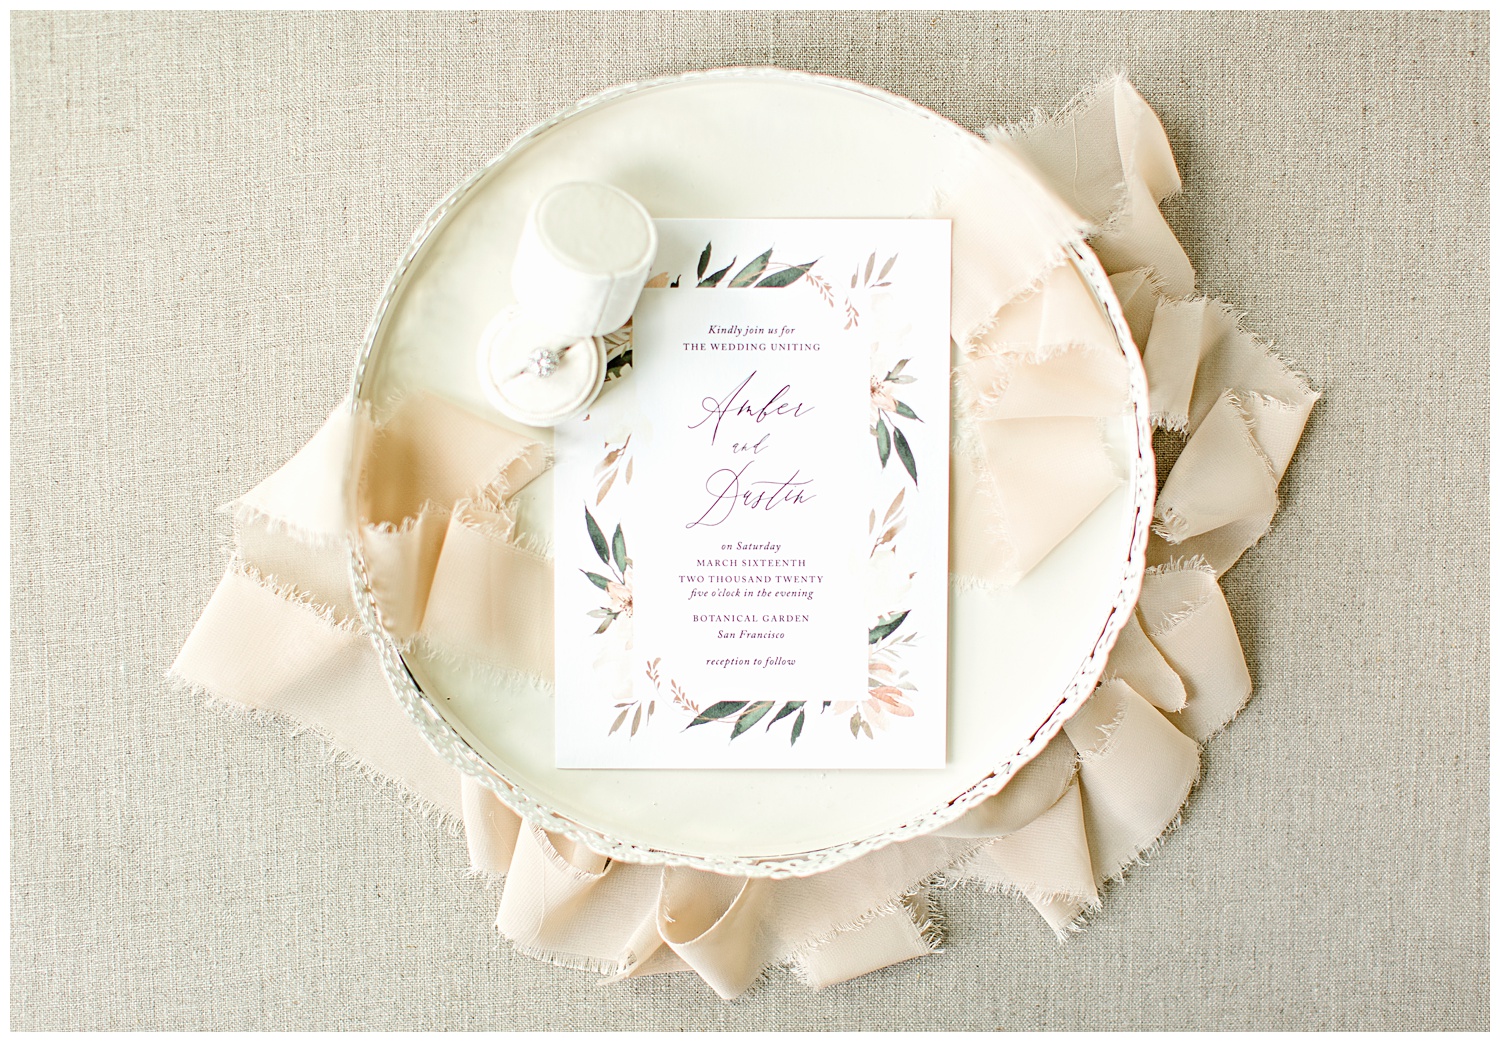 Peach and green watercolor floral wedding invitation from Elli beautifully styled on a cream decorative tray with a cream ring box and peach frayed edge ribbon.